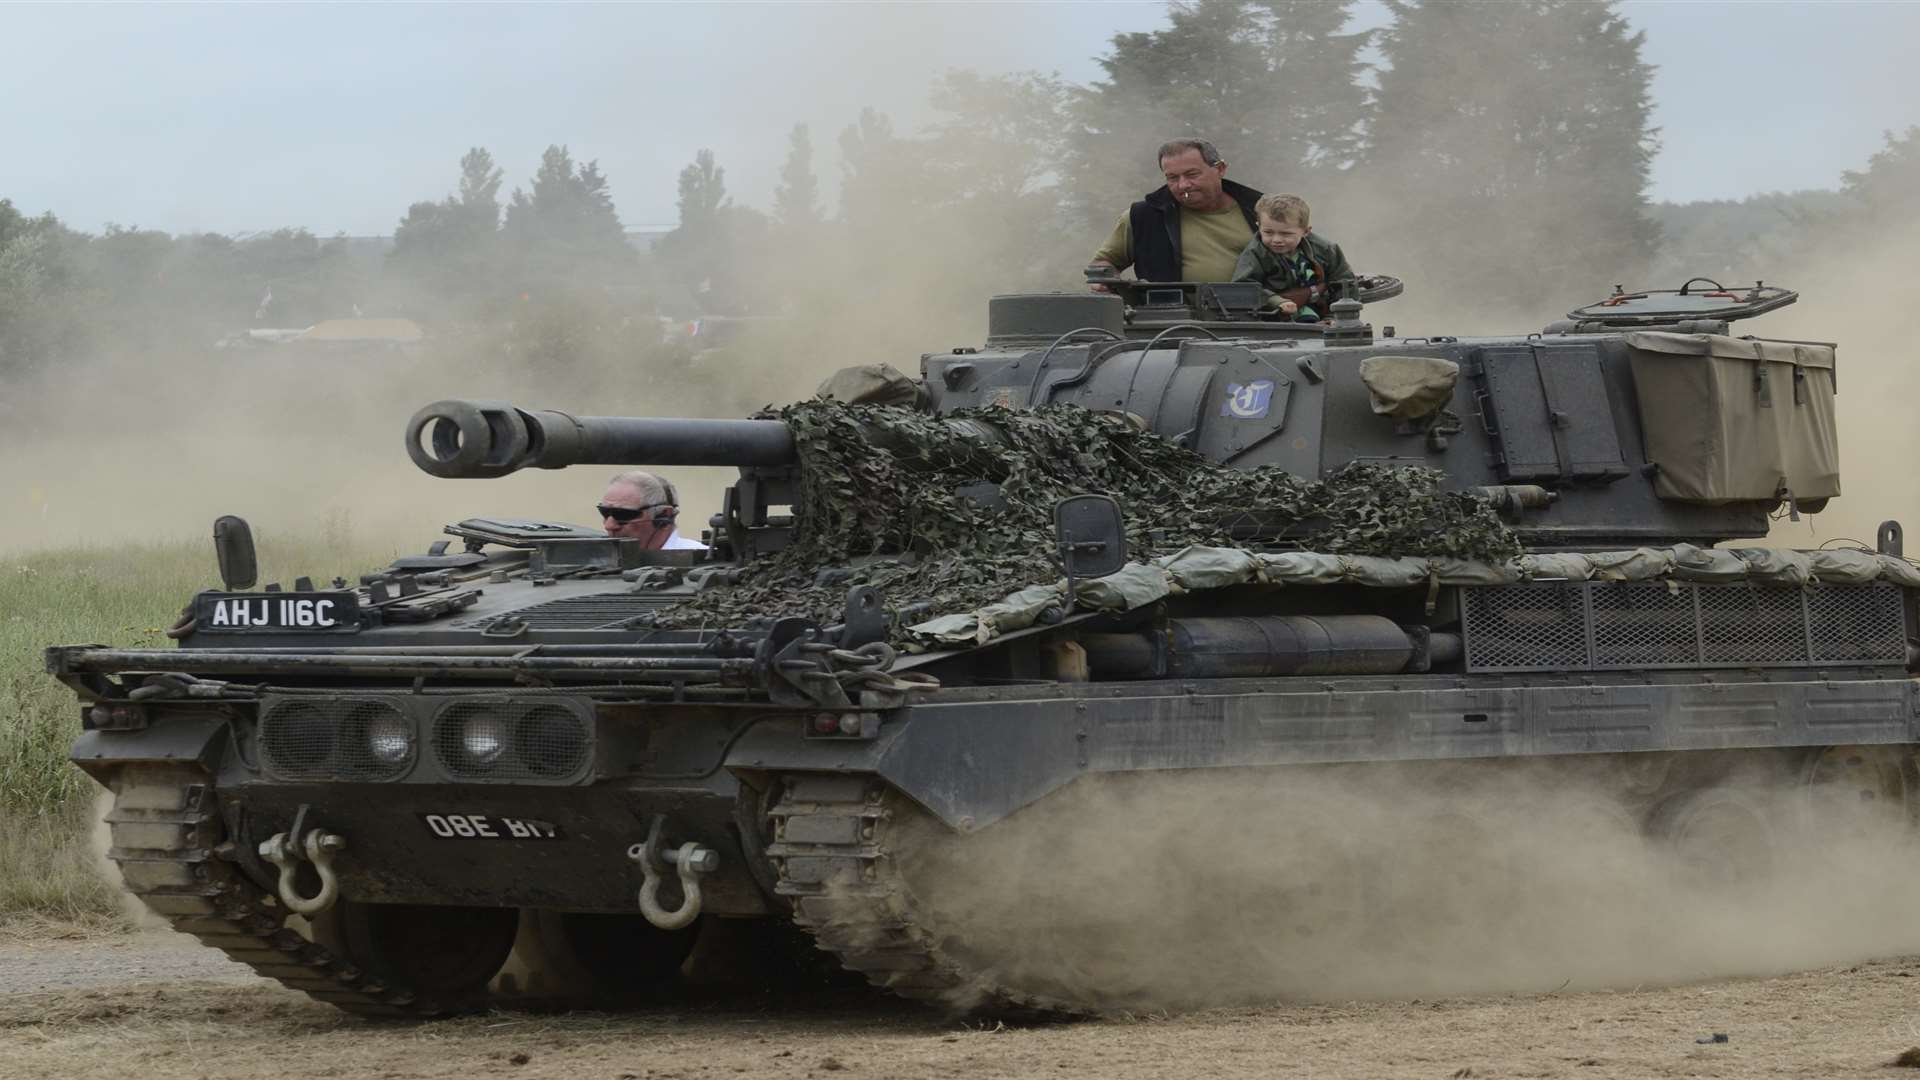 The War and Peace revival is the UK's largest vintage and military festival